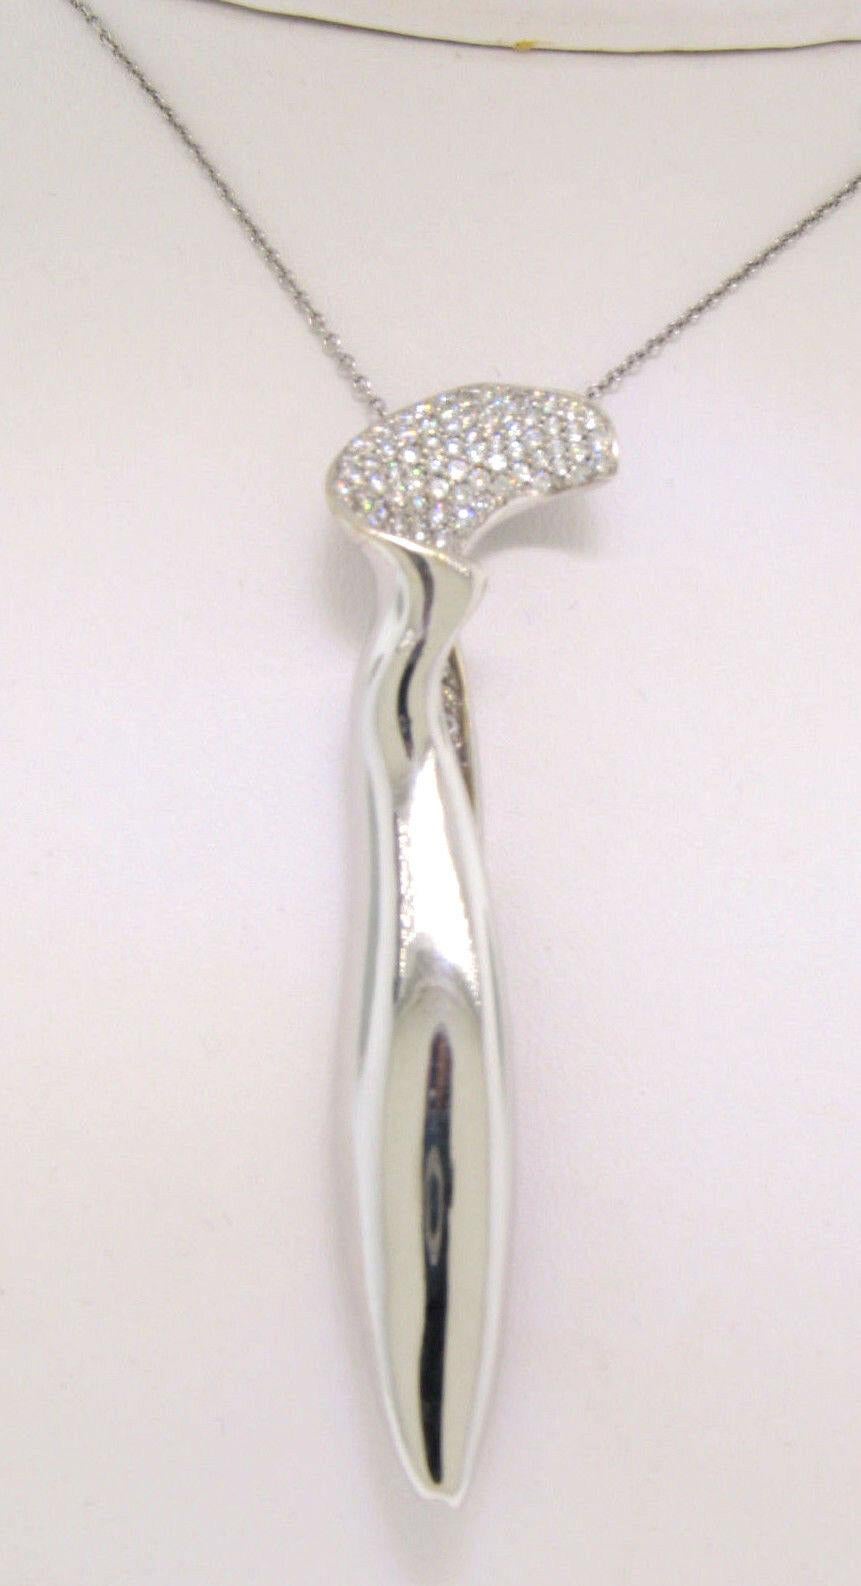 This 100% authentic Tiffany & Co. piece was designed by Frank Gehry and was crafted in solid 18k white gold. The top part of this Orchid pendant is elegantly covered in pavé set round brilliant cut diamonds which weigh an approximate total of 0.95